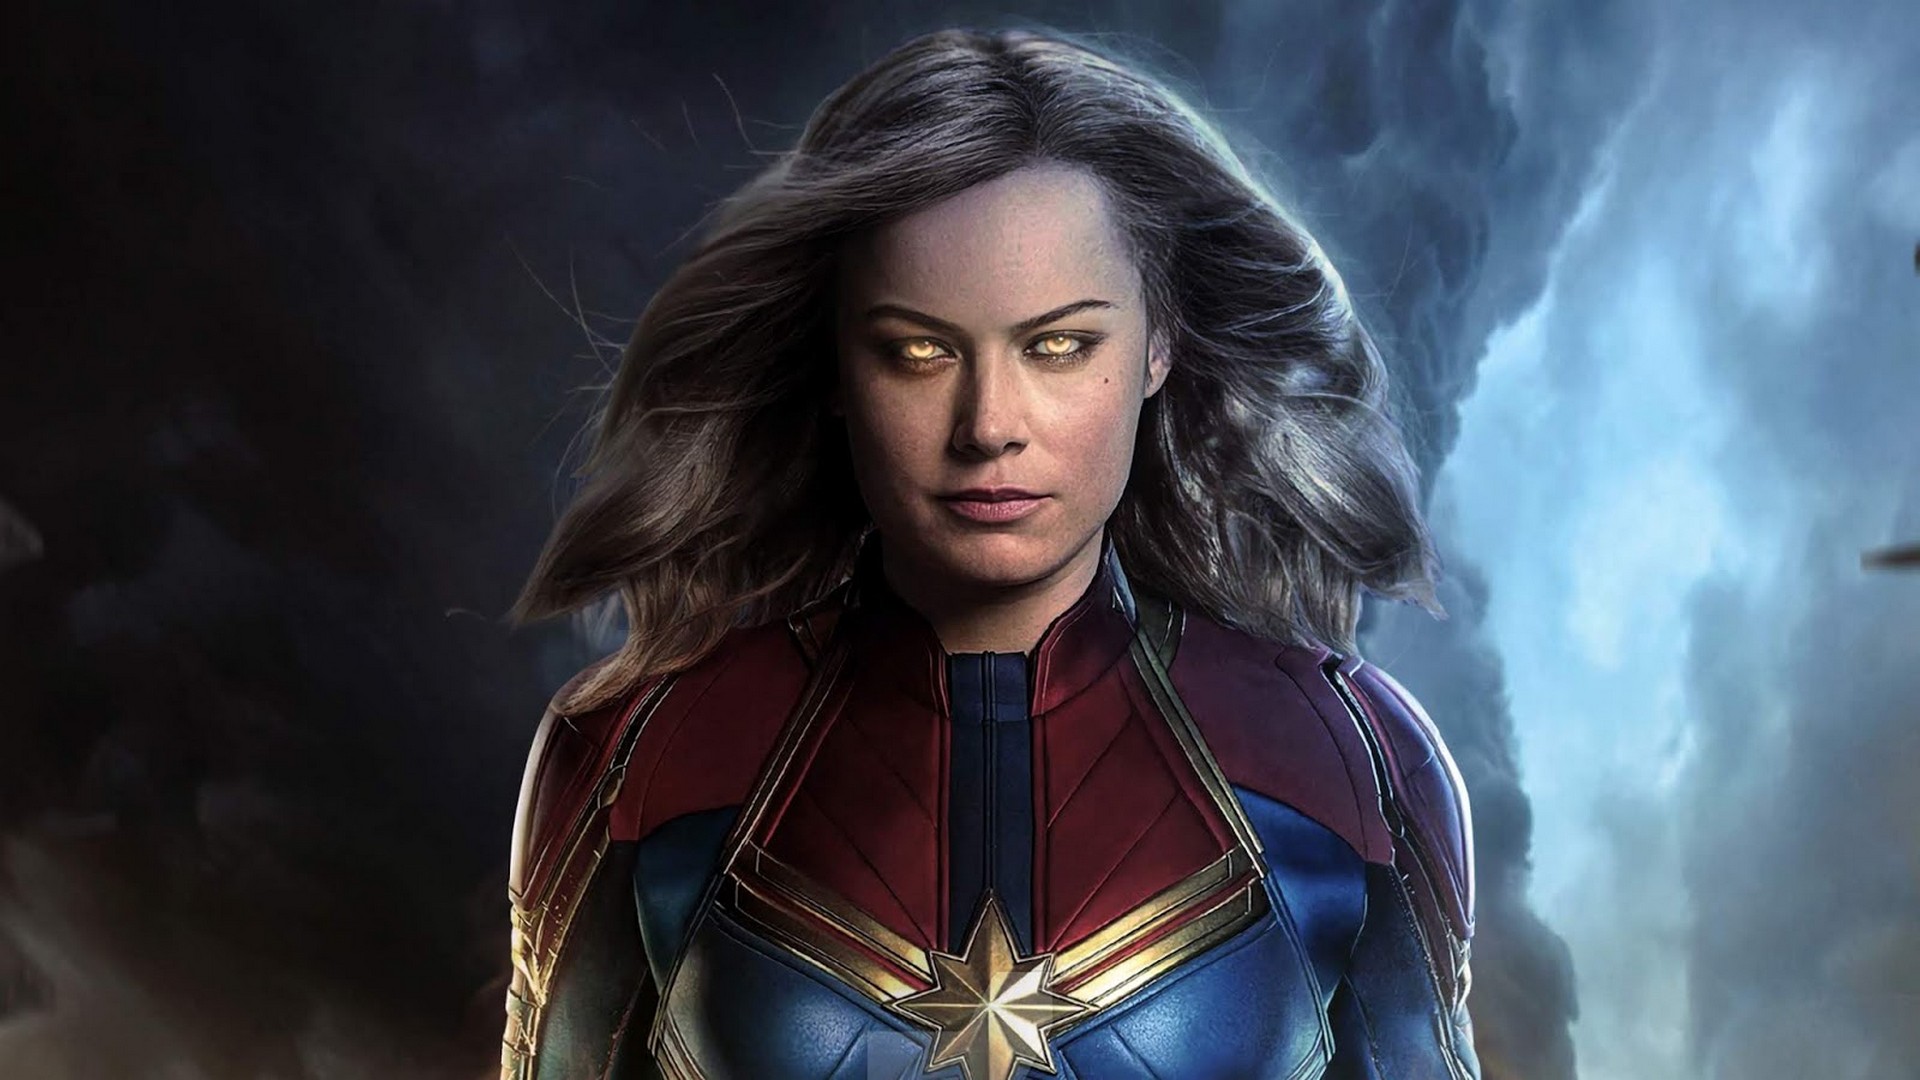 Captain Marvel Wallpaper HD With high-resolution 1920X1080 pixel. You can use this wallpaper for your Desktop Computer Backgrounds, Mac Wallpapers, Android Lock screen or iPhone Screensavers and another smartphone device